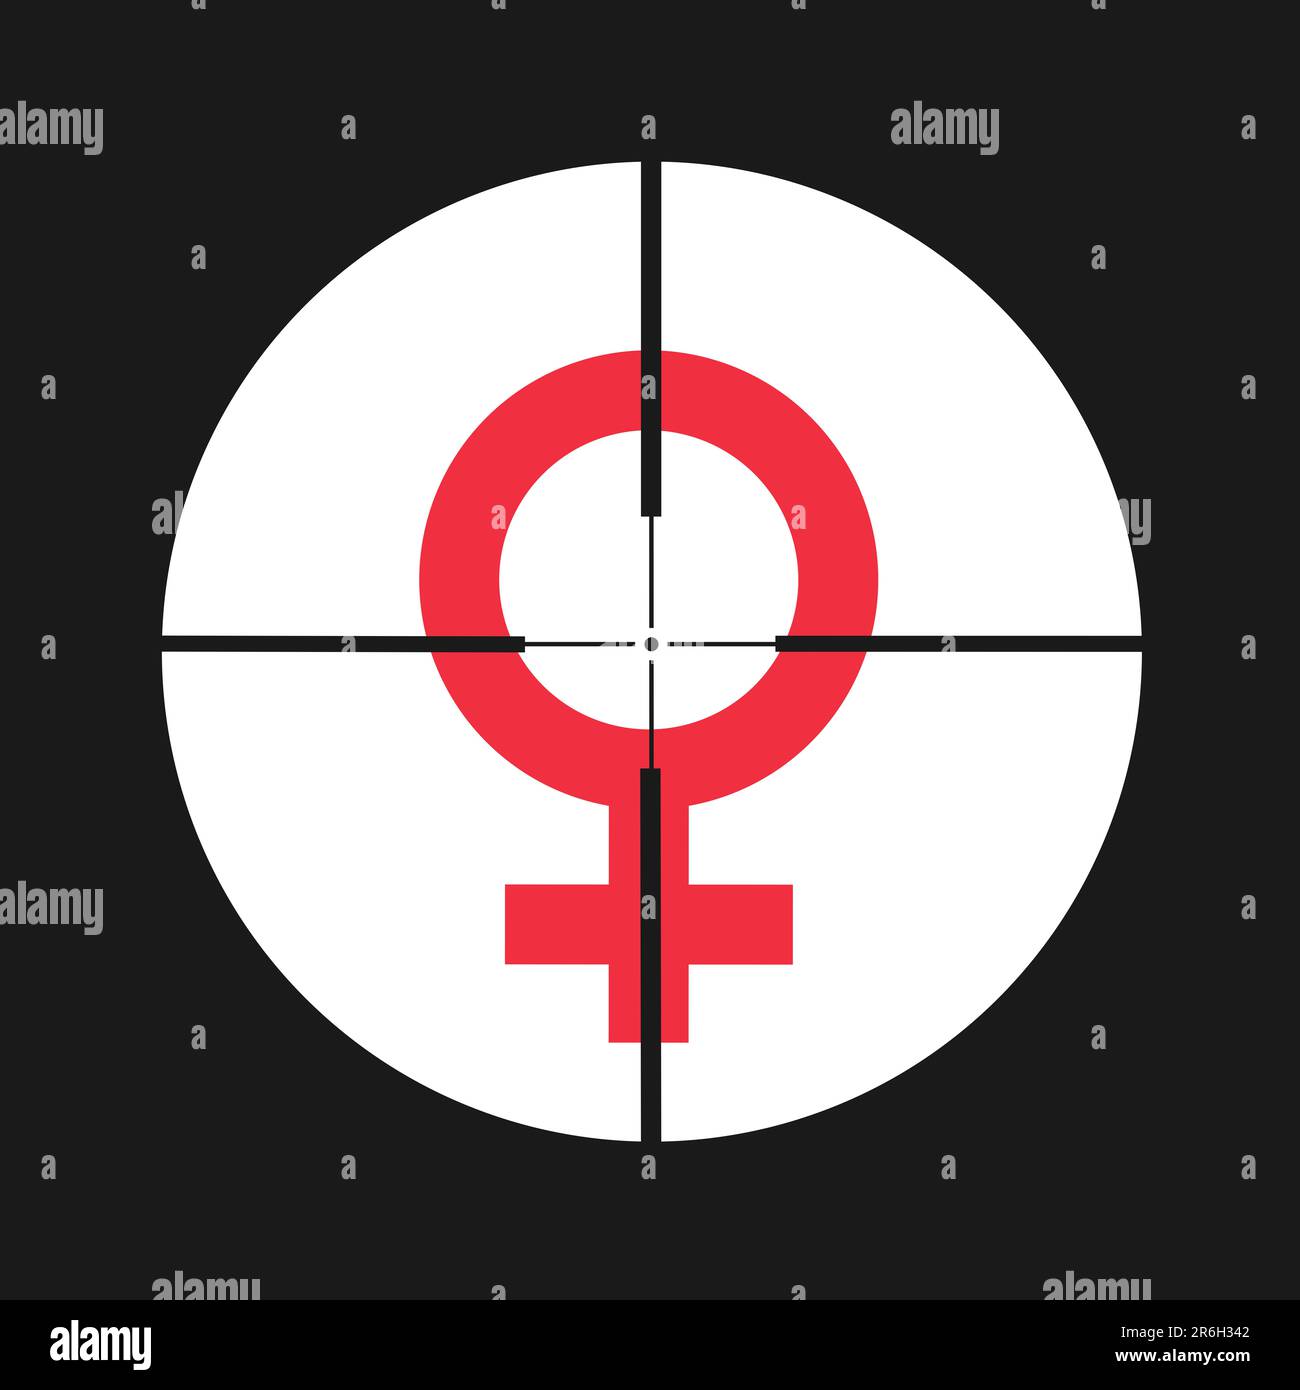 Misogyny - Gunsight targetting on female sex symbol as metaphor of woman being under sexist and offensive attack and assault based on sex and gender. Stock Photo